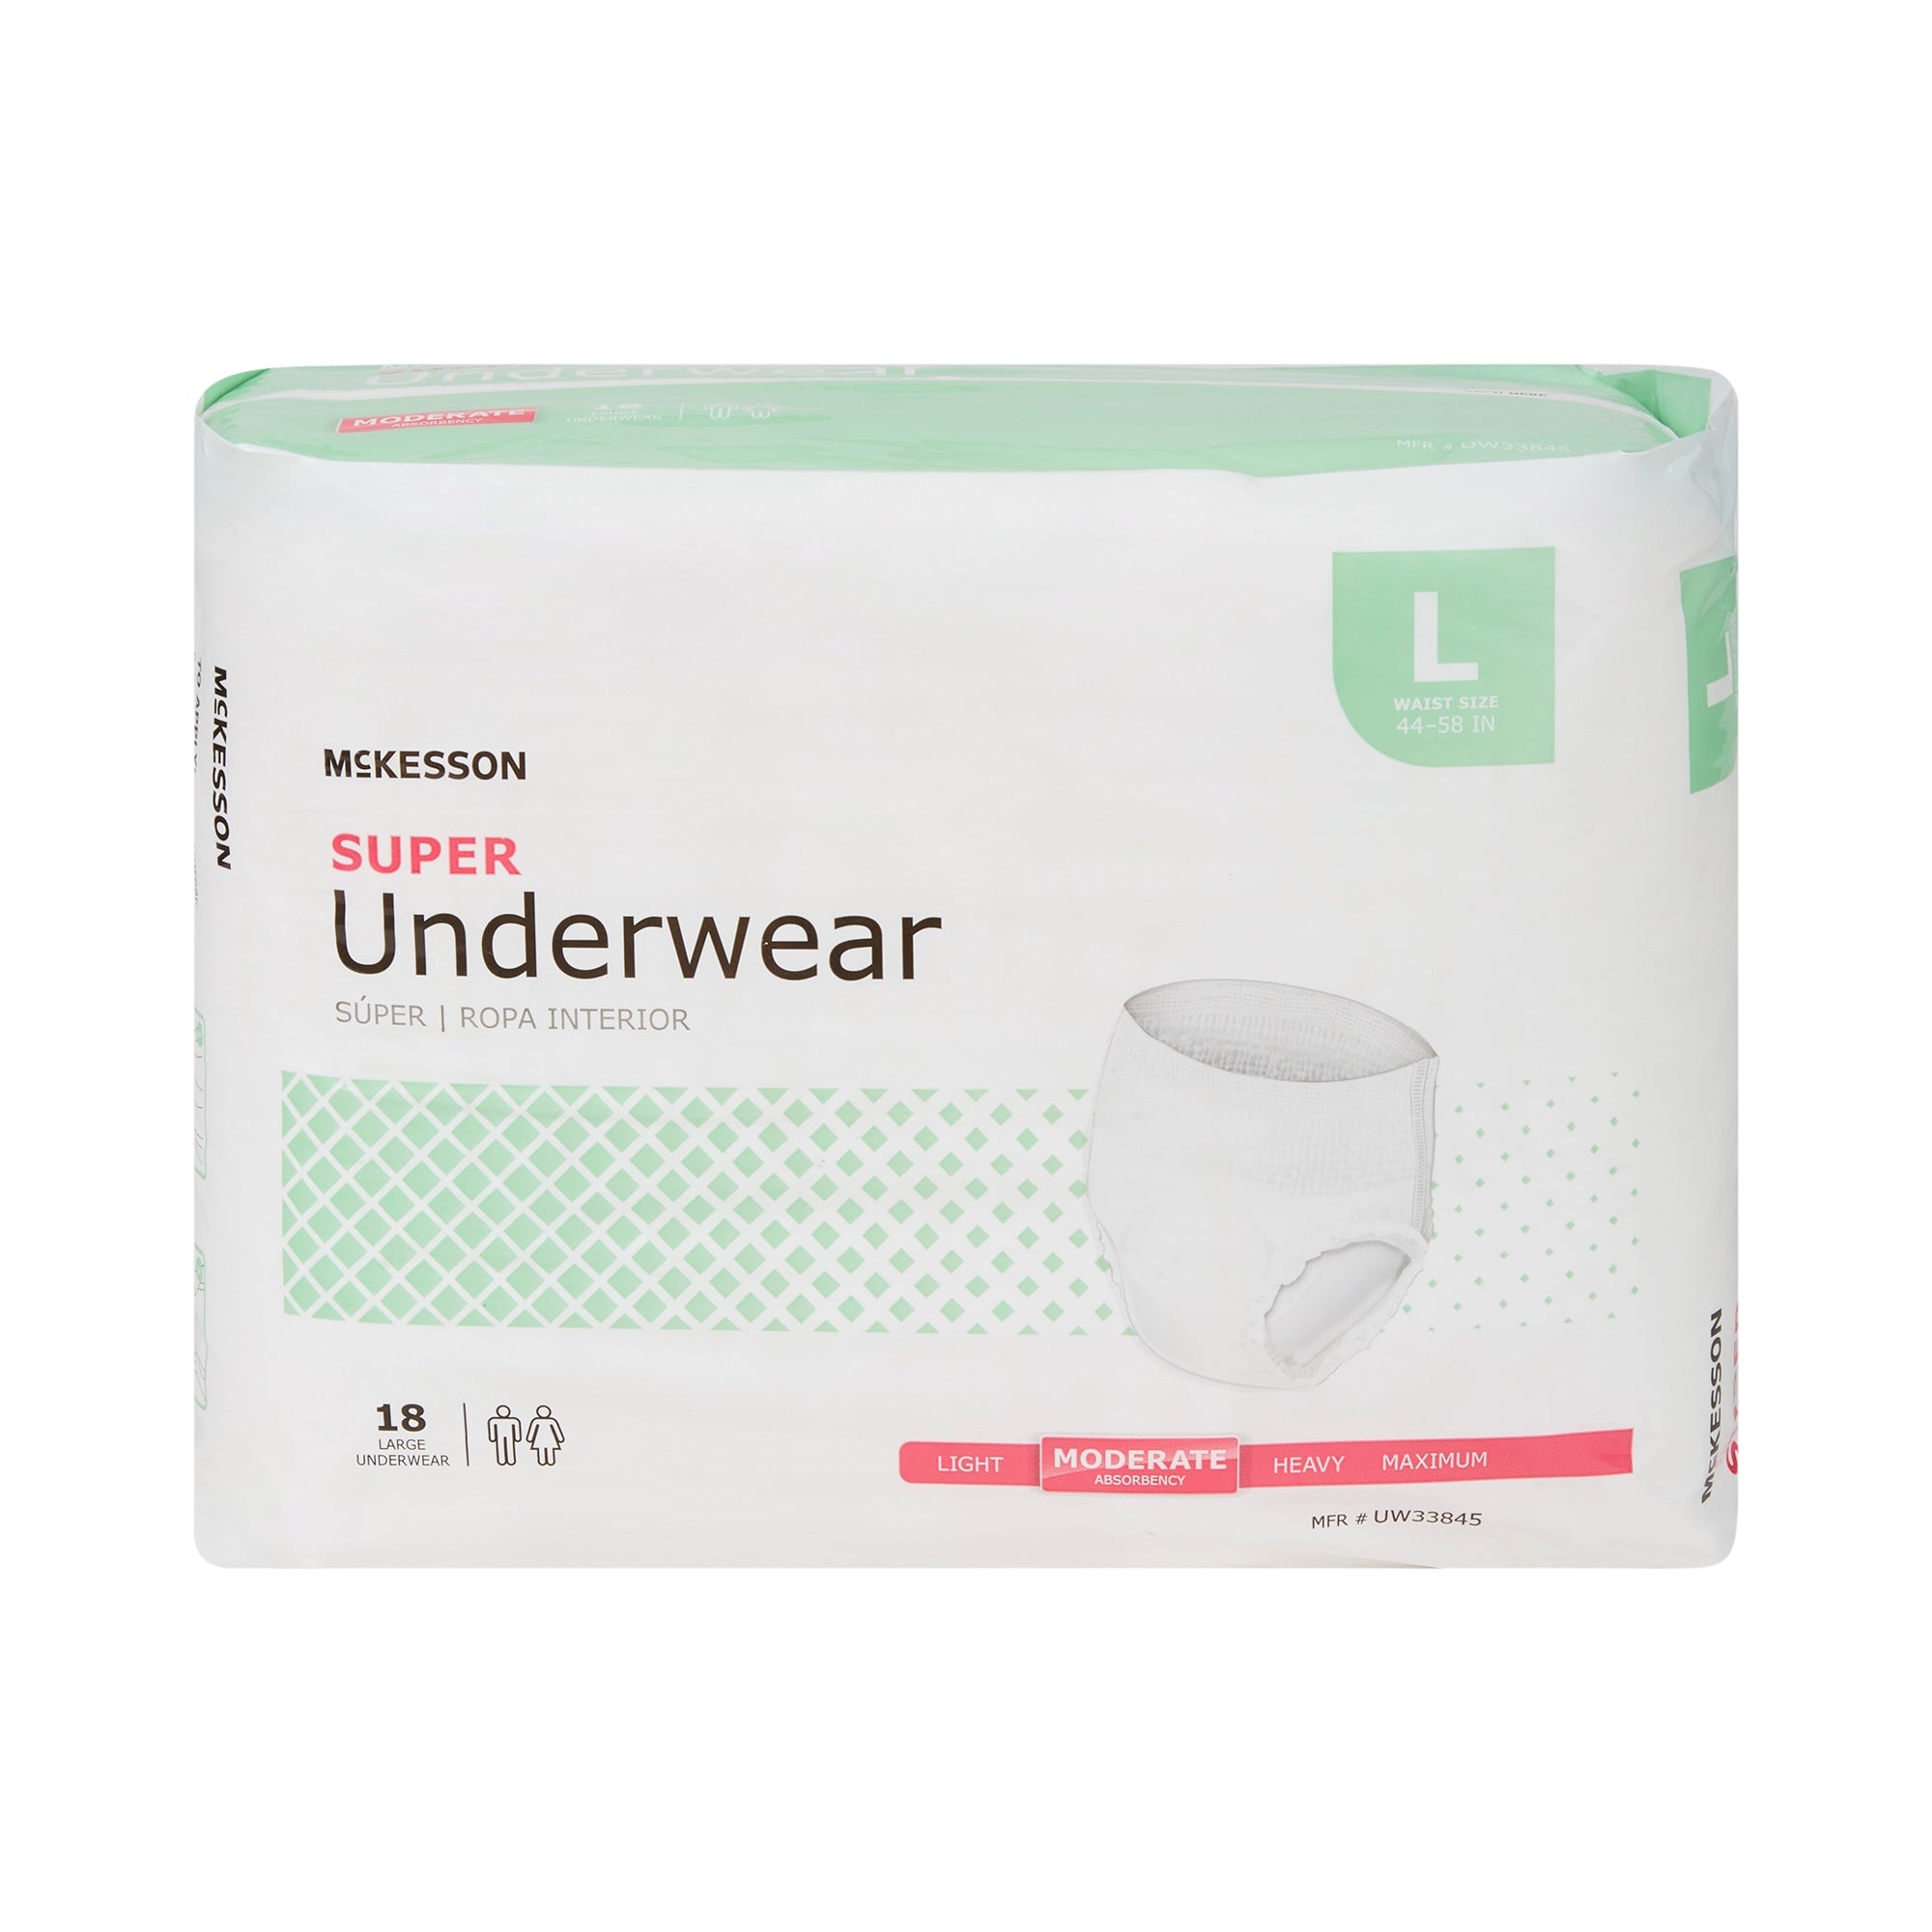 McKesson Large Absorbent Underwear - Super Moderate, 72-Pack for Adults